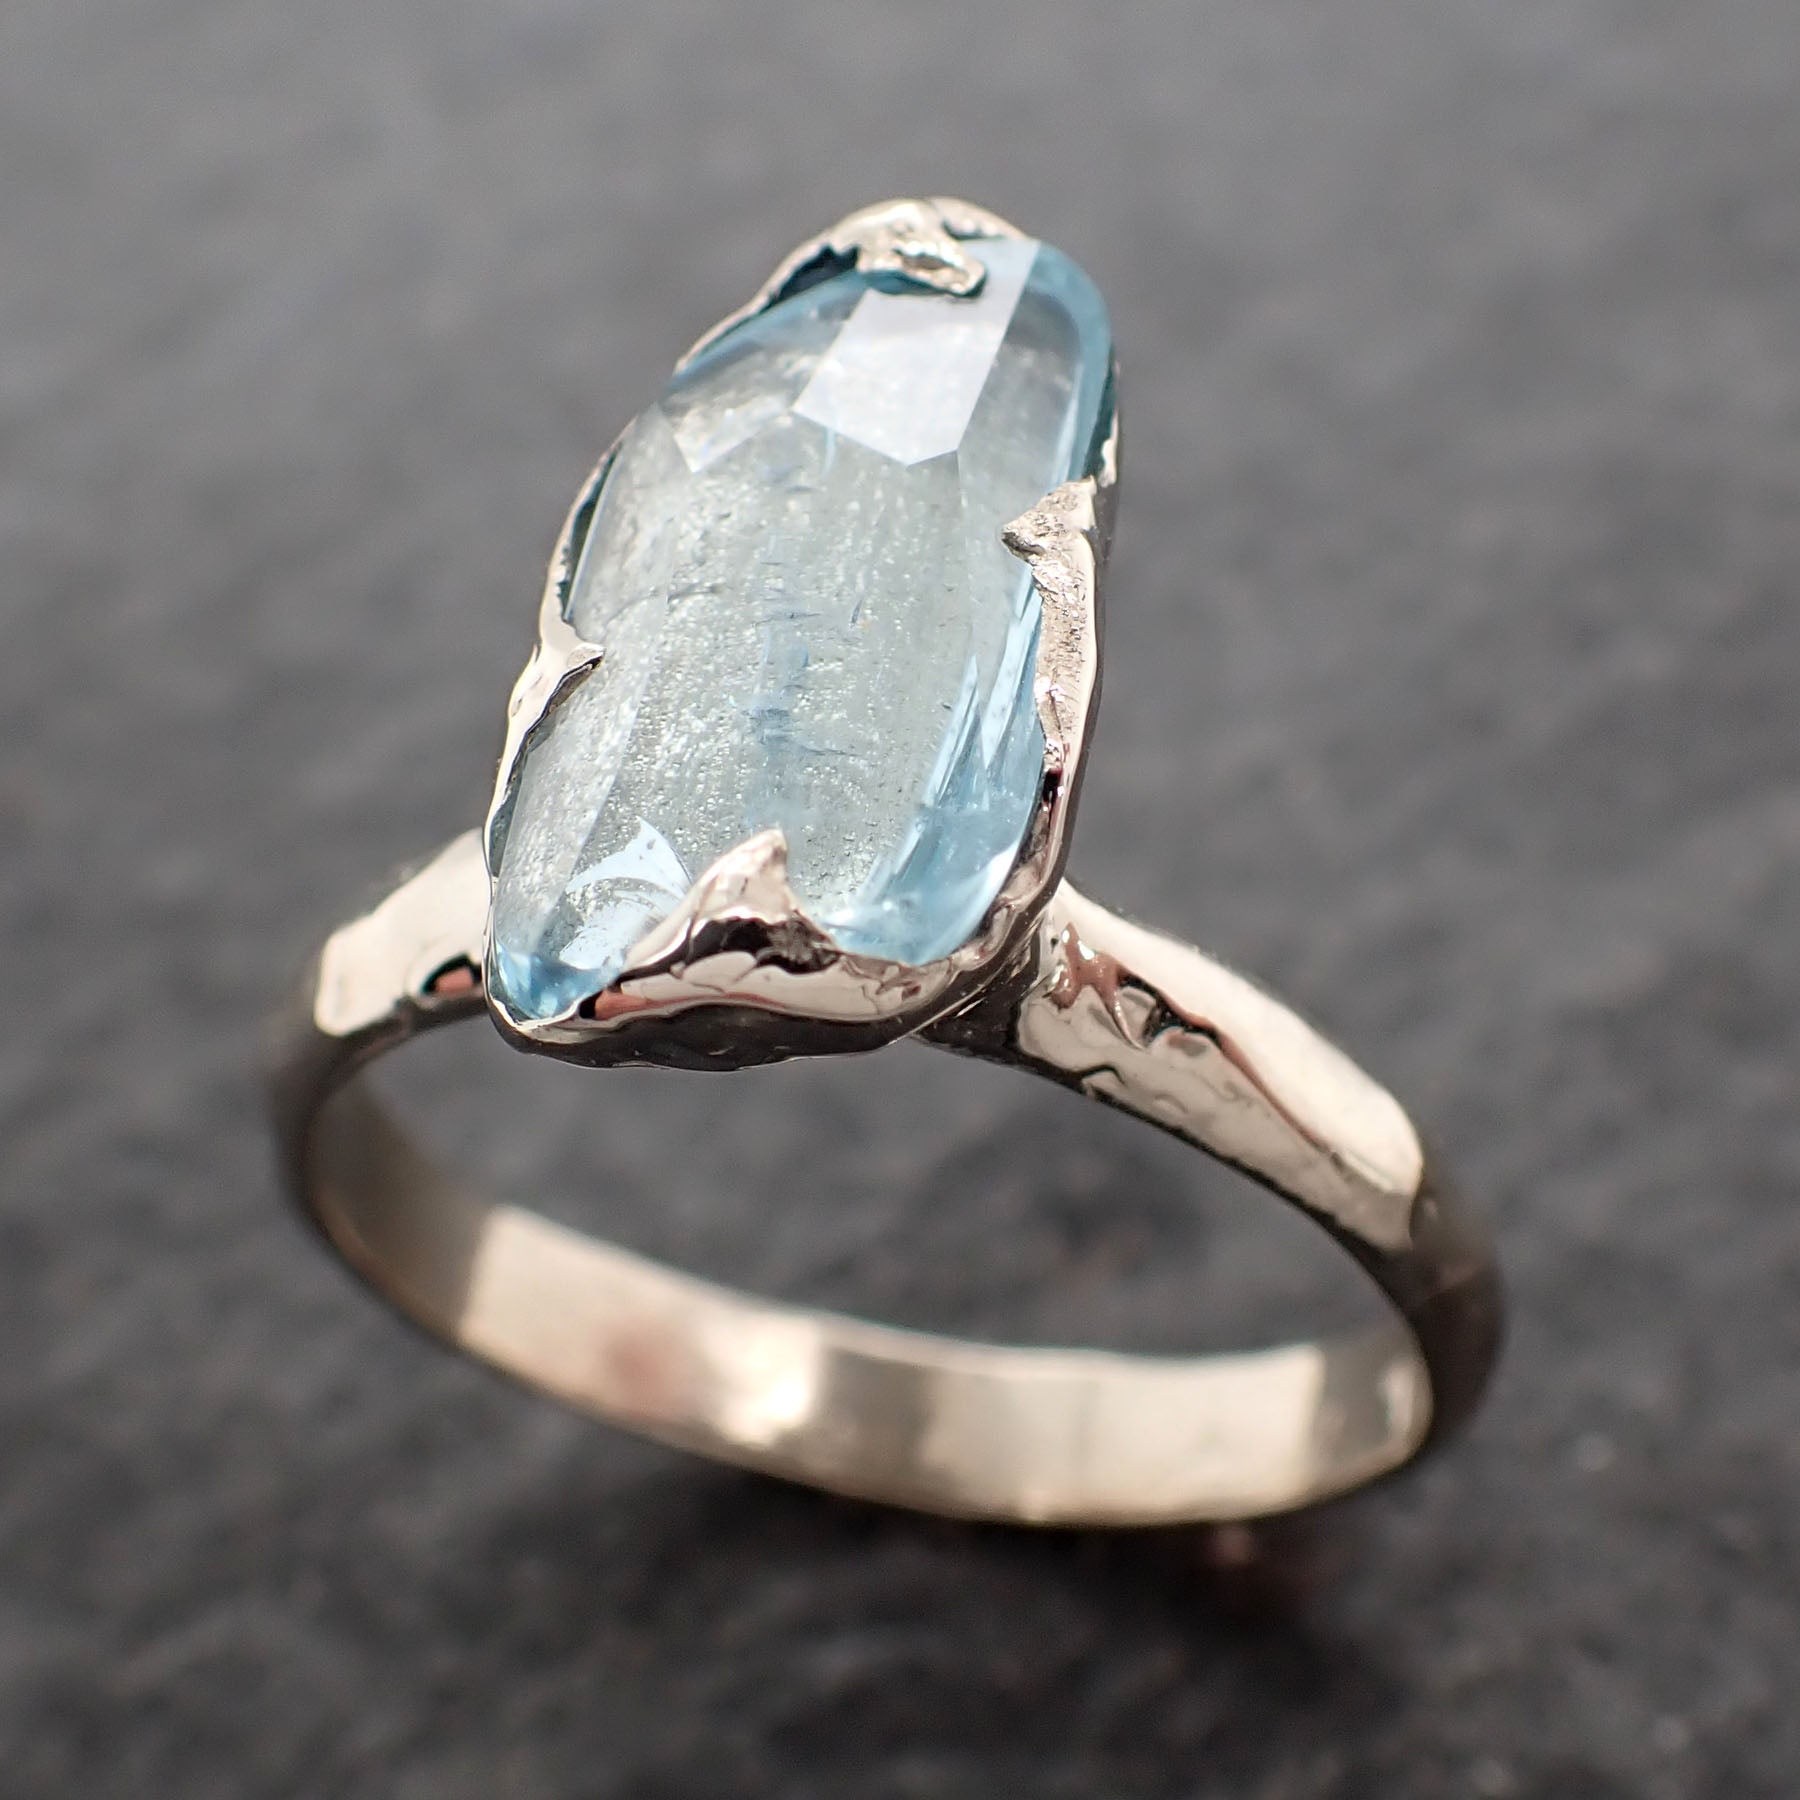 Partially faceted Aquamarine Solitaire Ring 14k White gold Custom One Of a Kind Gemstone Ring Bespoke byAngeline 2730